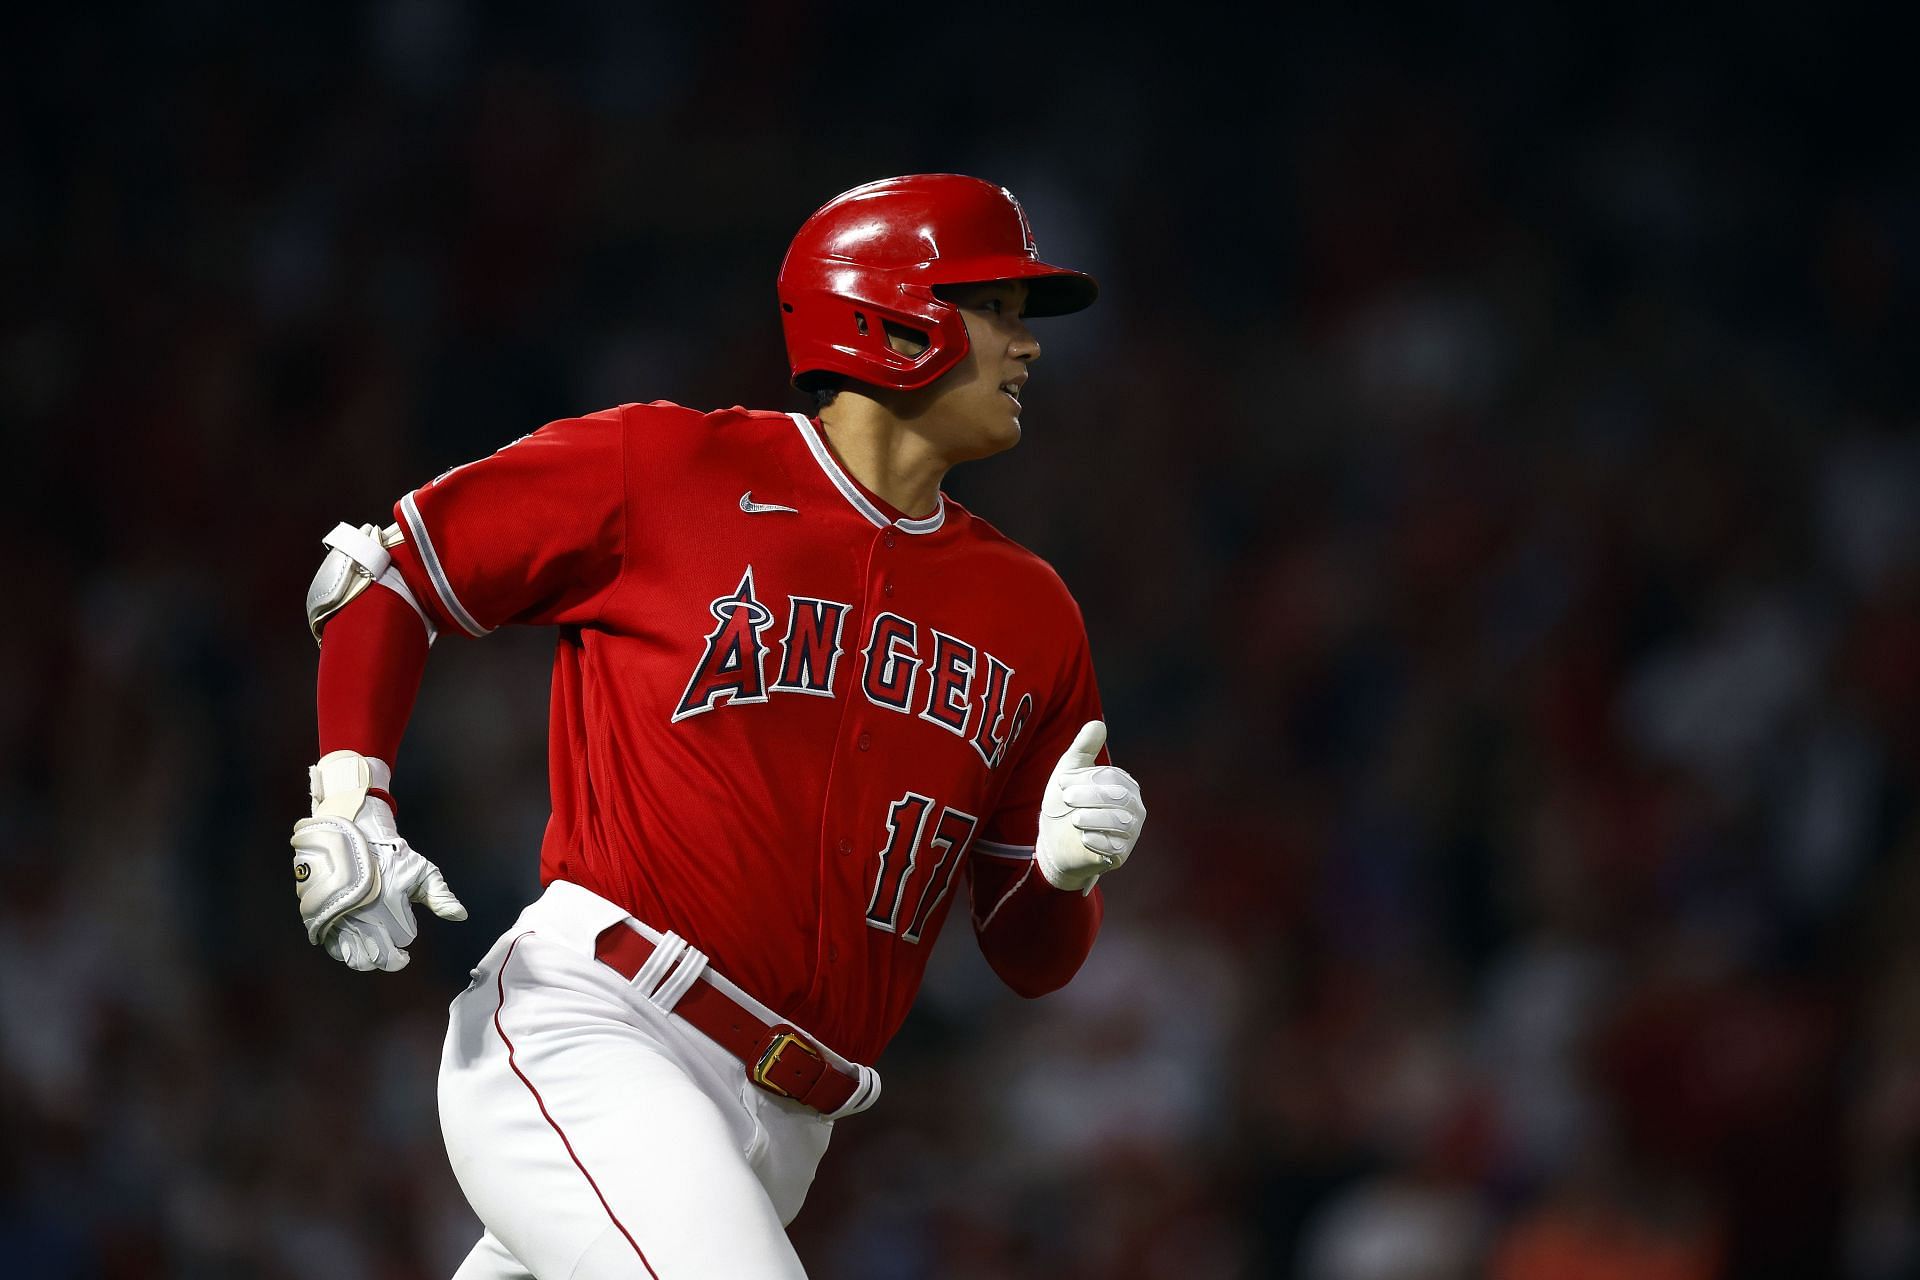 Shohei Ohtani hits a home run against the Minnesota Twins in the eighth inning at Angel Stadium.